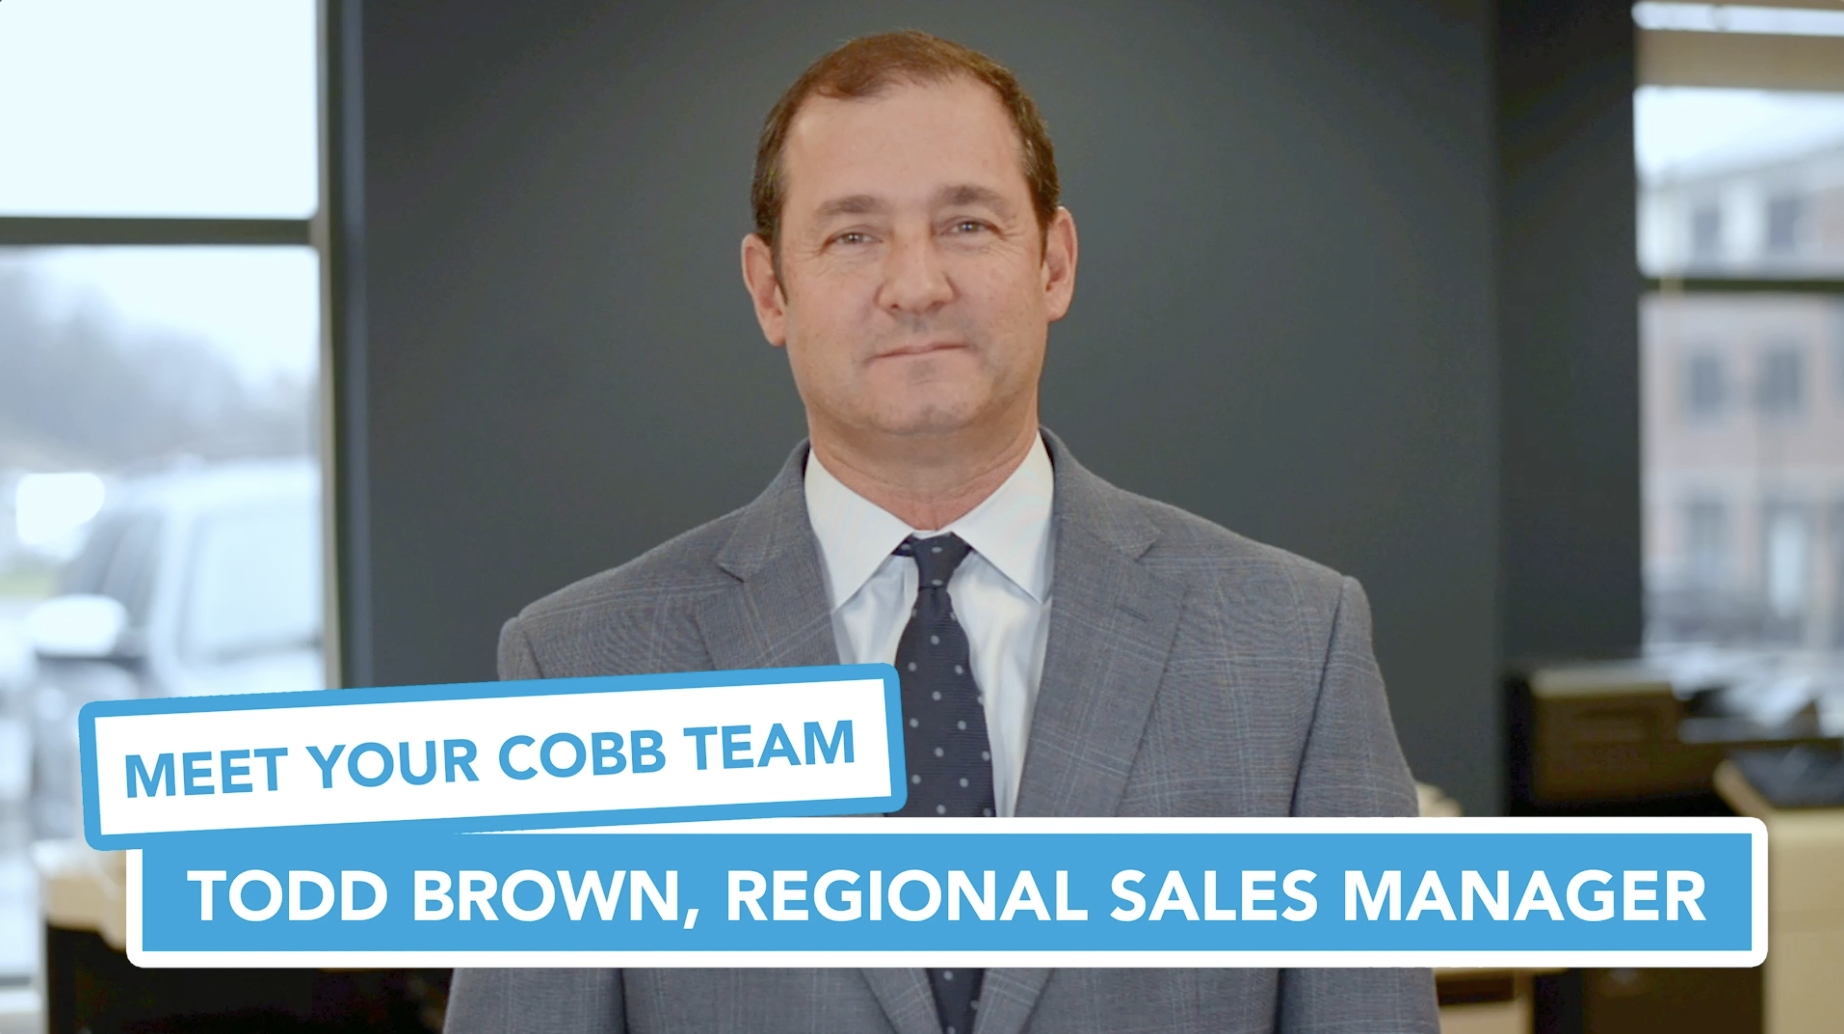 Meet Your Cobb Team: Todd Brown, Regional Sales Manager